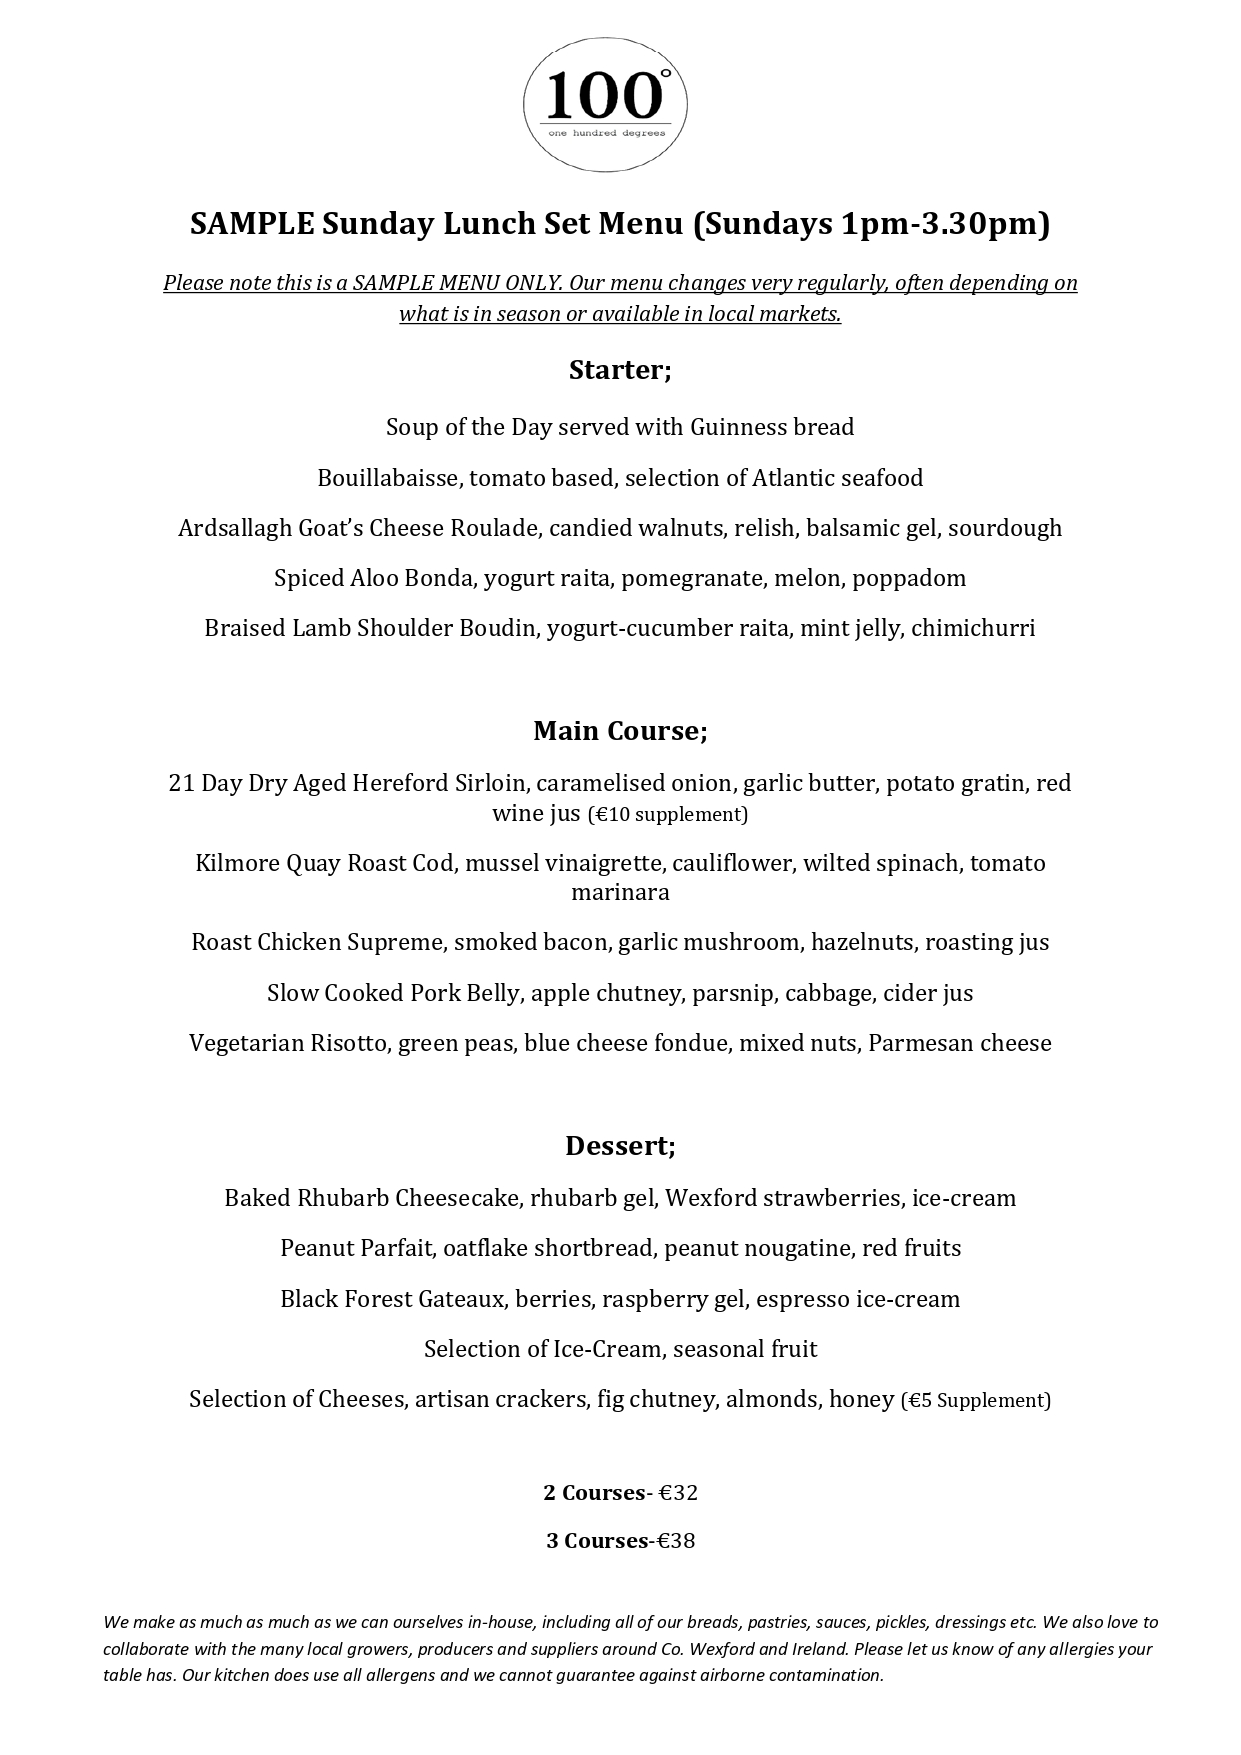 100 degrees sunday lunch menu